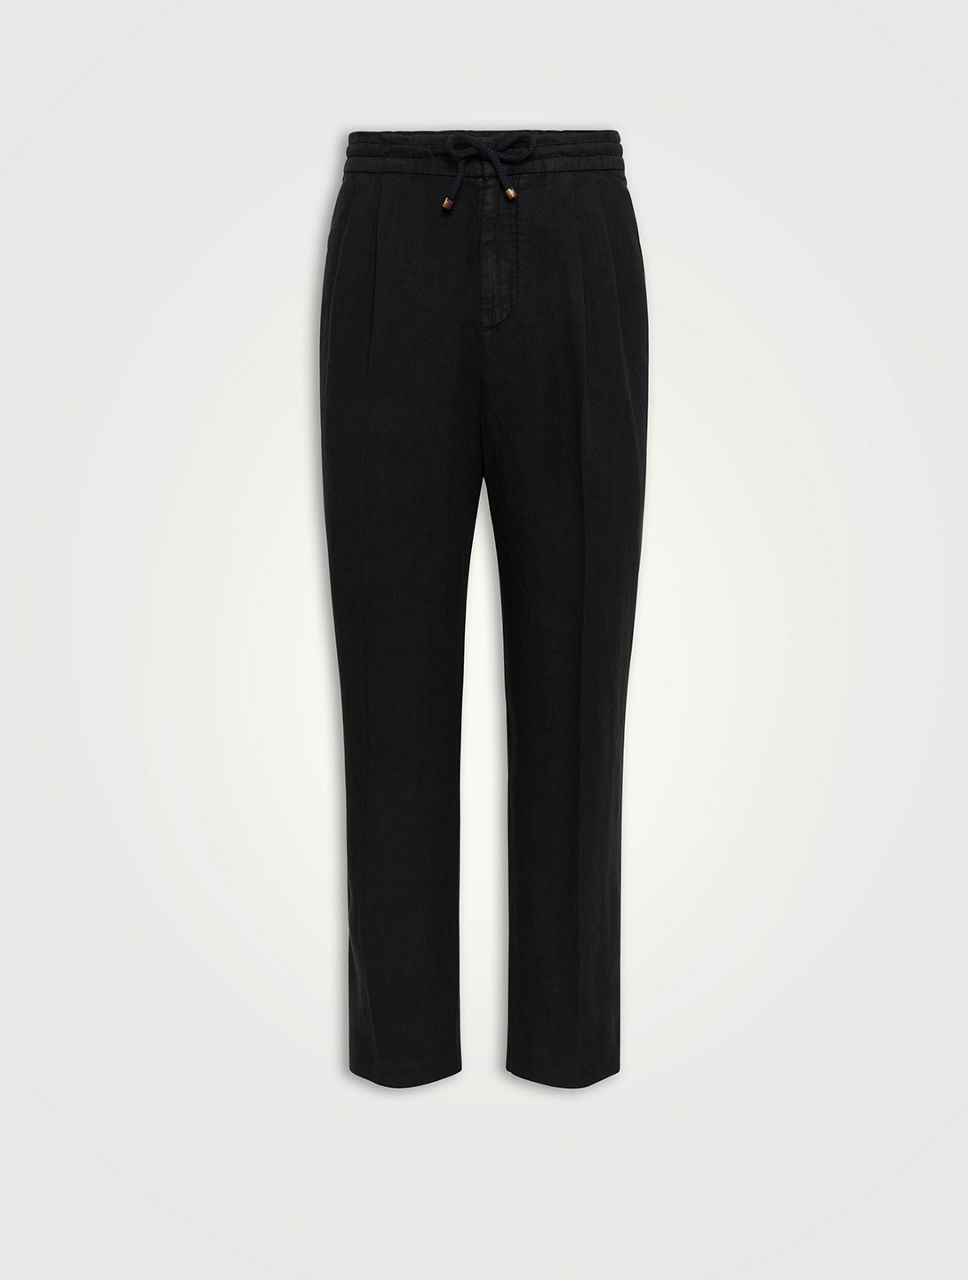 Leisure Fit Trousers